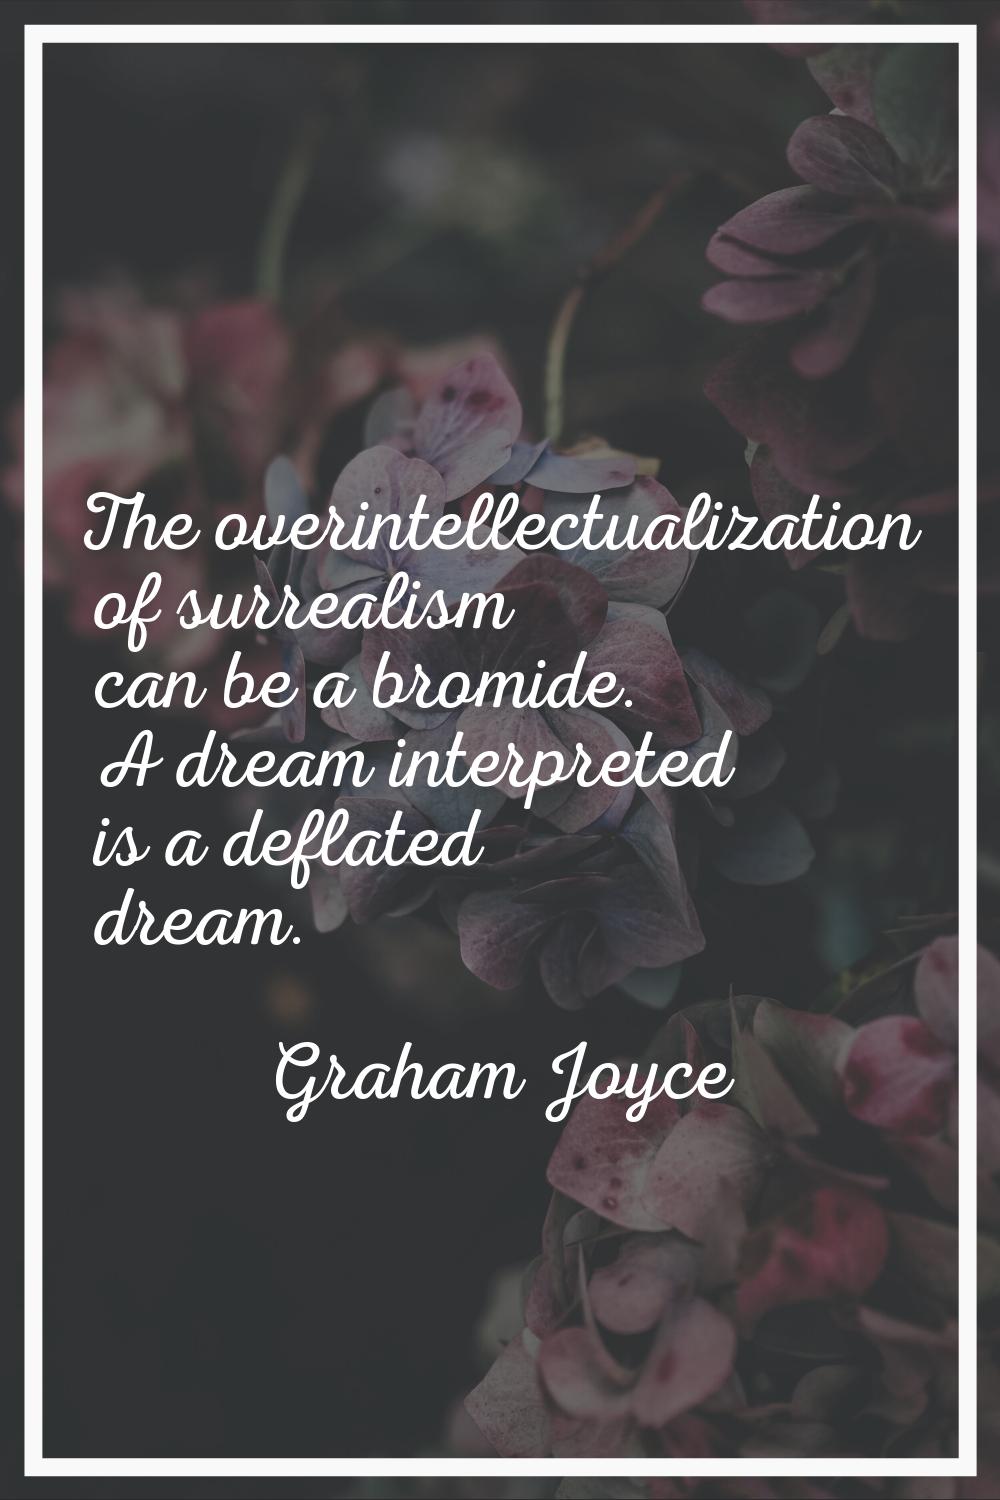 The overintellectualization of surrealism can be a bromide. A dream interpreted is a deflated dream